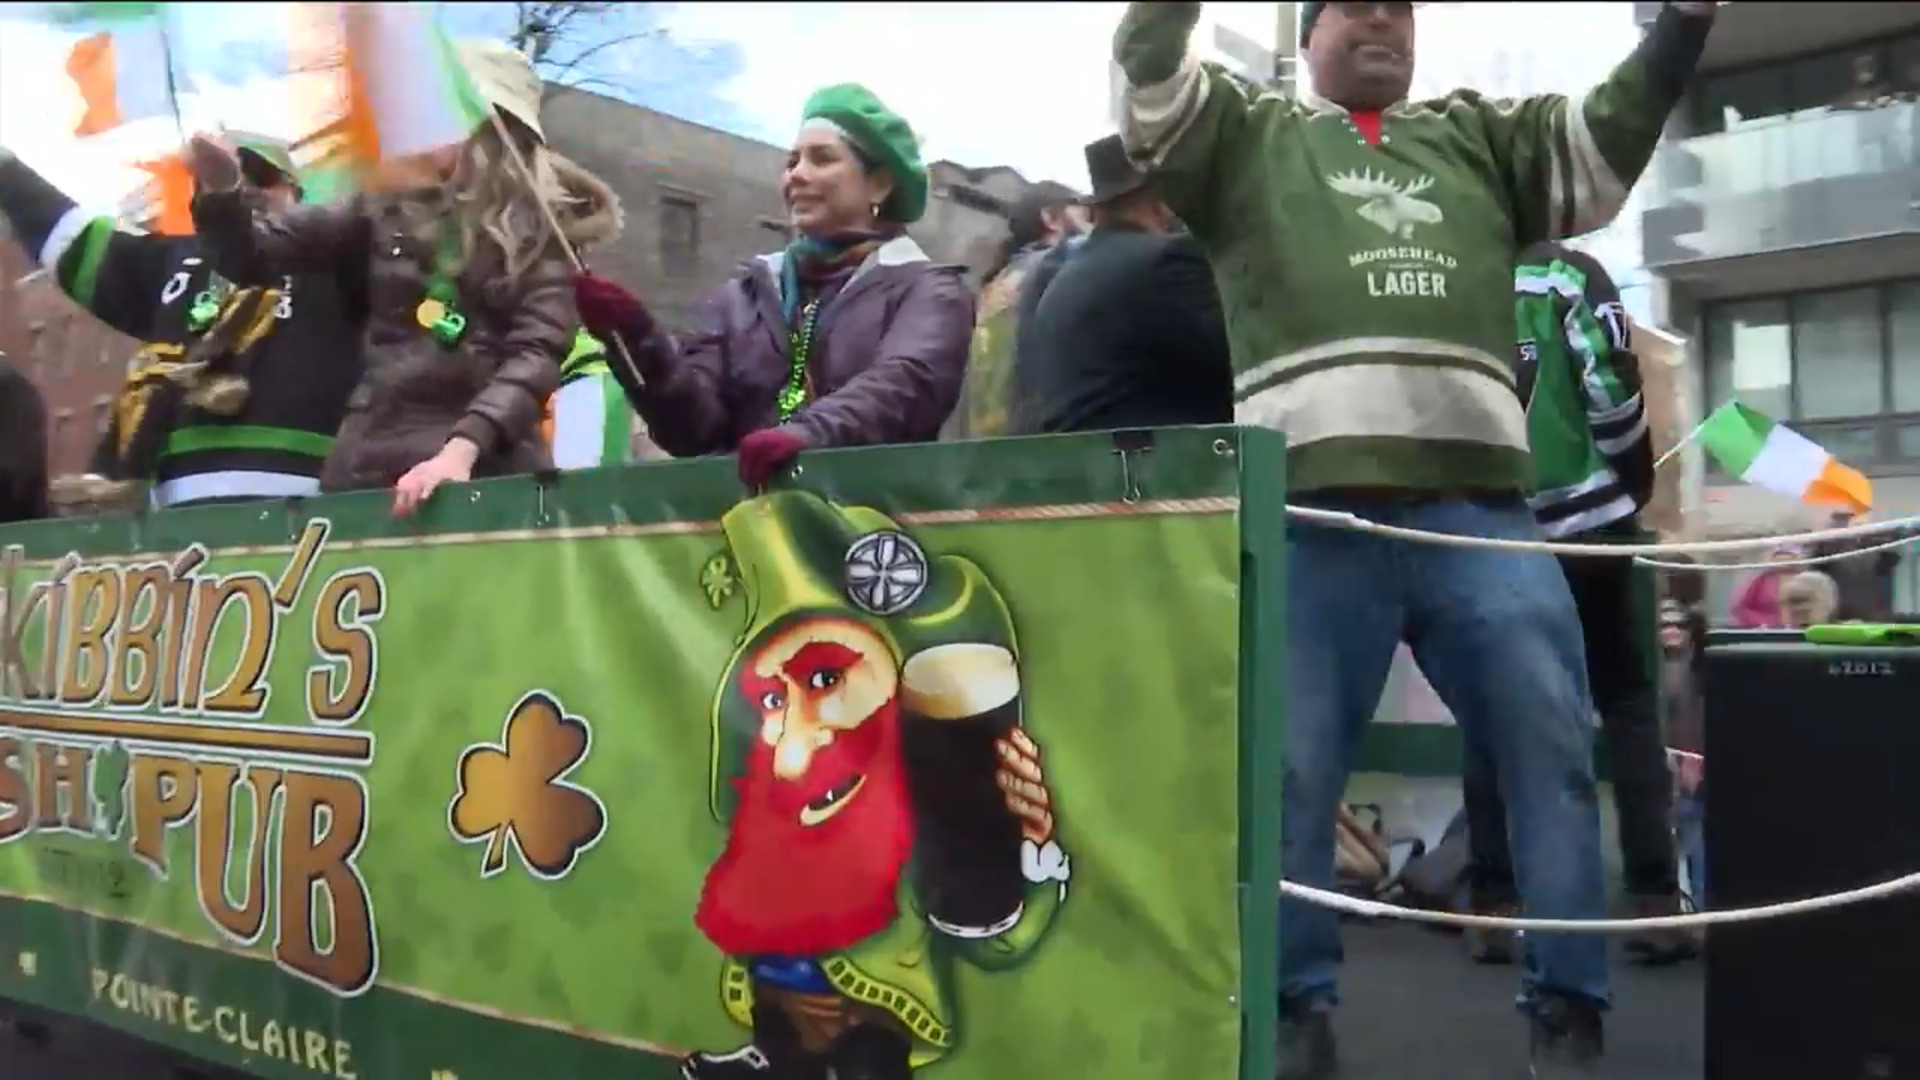 Getting into the Irish spirit at the 199th St. Patrick’s Day parade